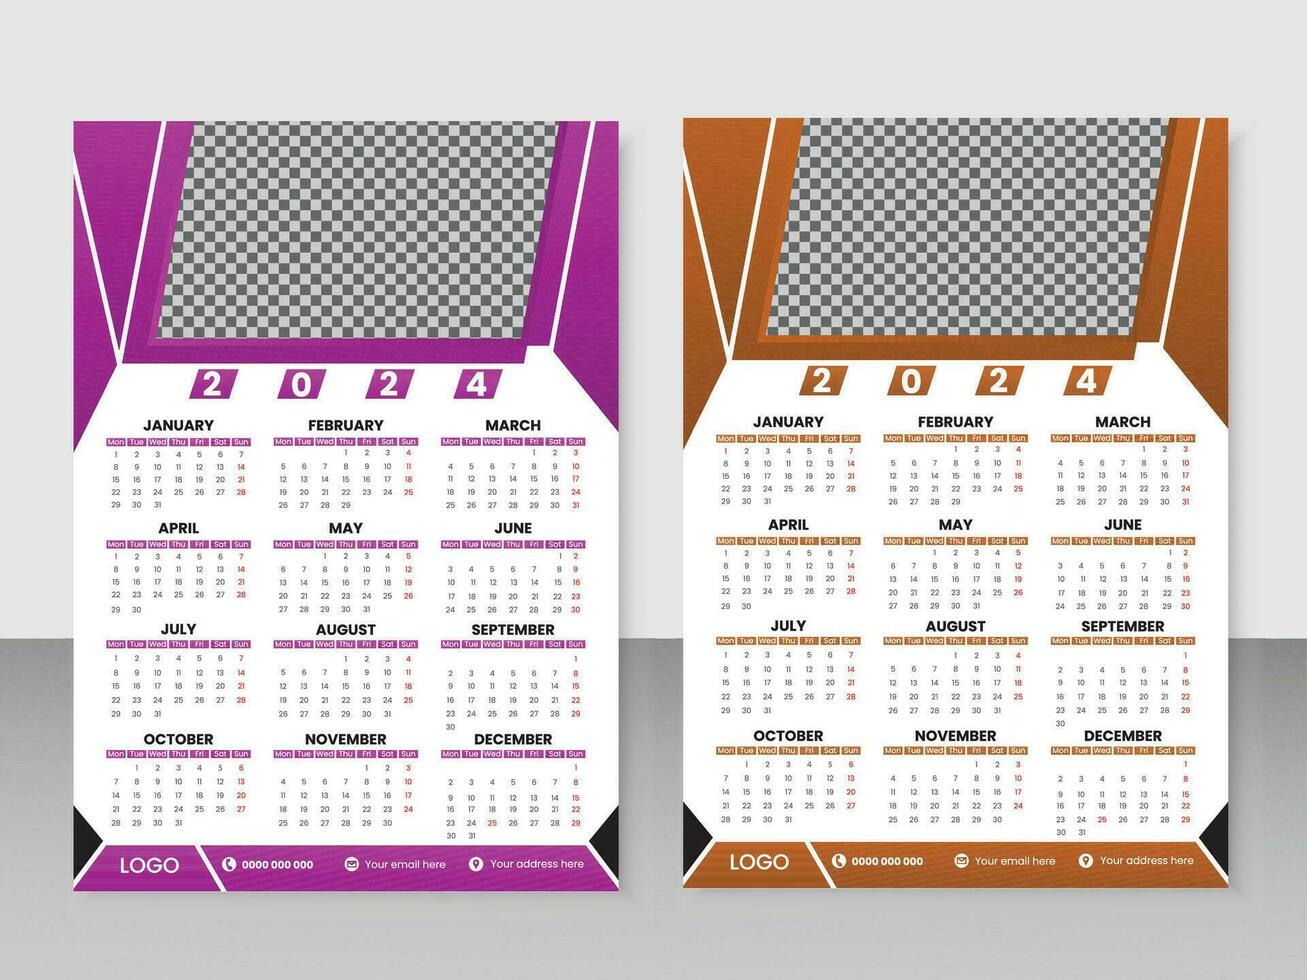 New year aesthetic and eye-catching vector wall calendar design template.